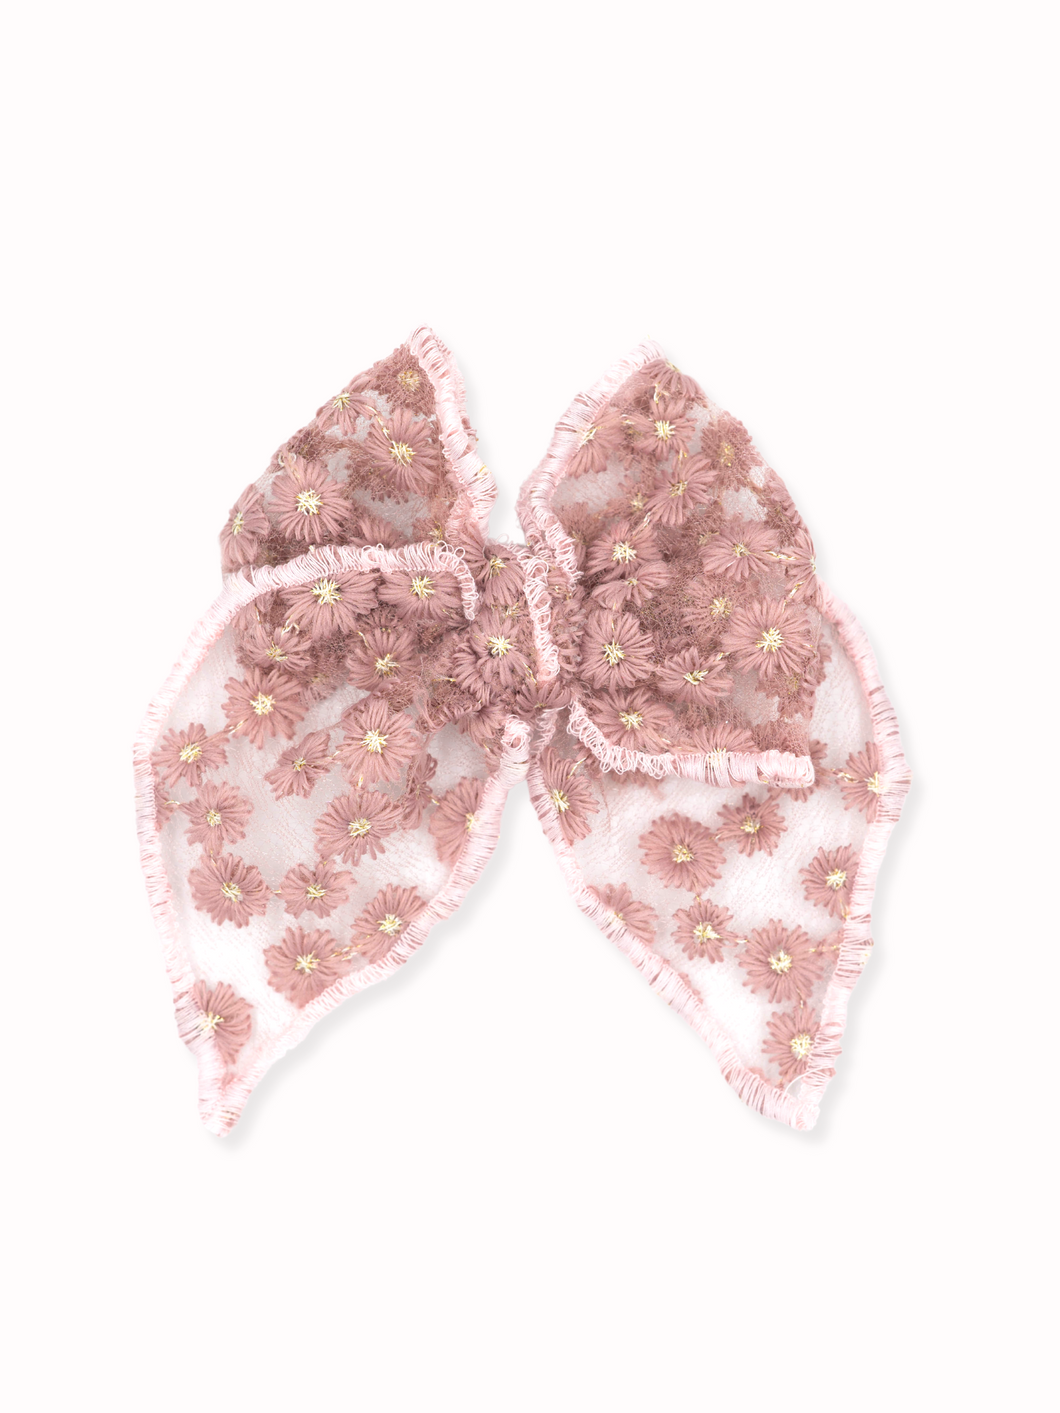 Livy Lou Collection Pink Chiffon Embroidered Bows